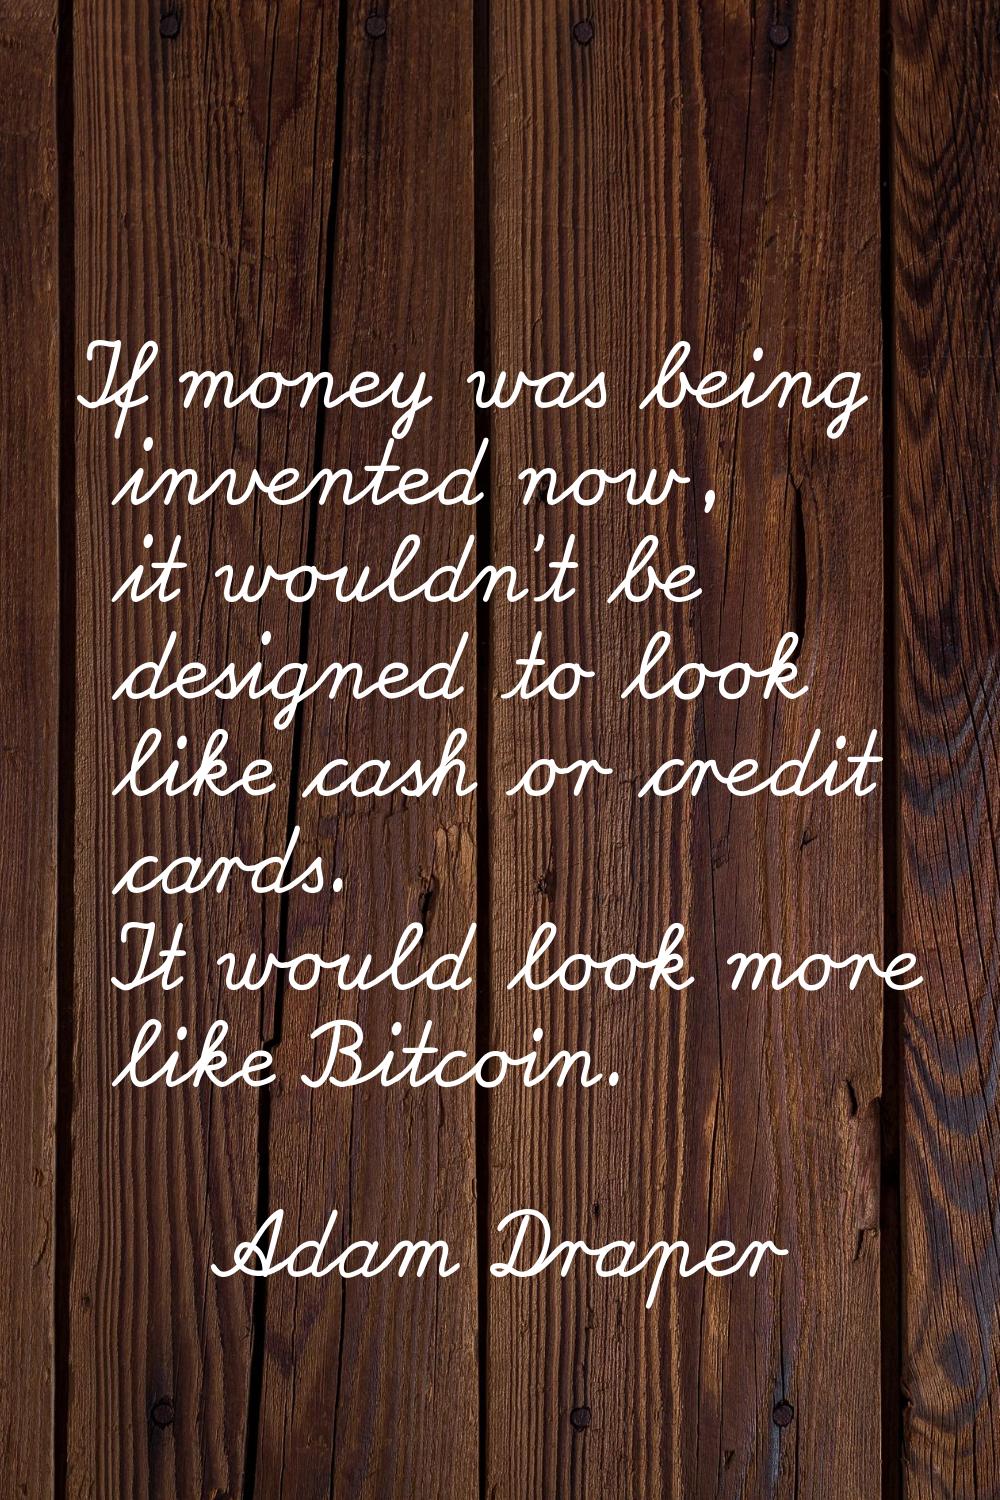 If money was being invented now, it wouldn't be designed to look like cash or credit cards. It woul